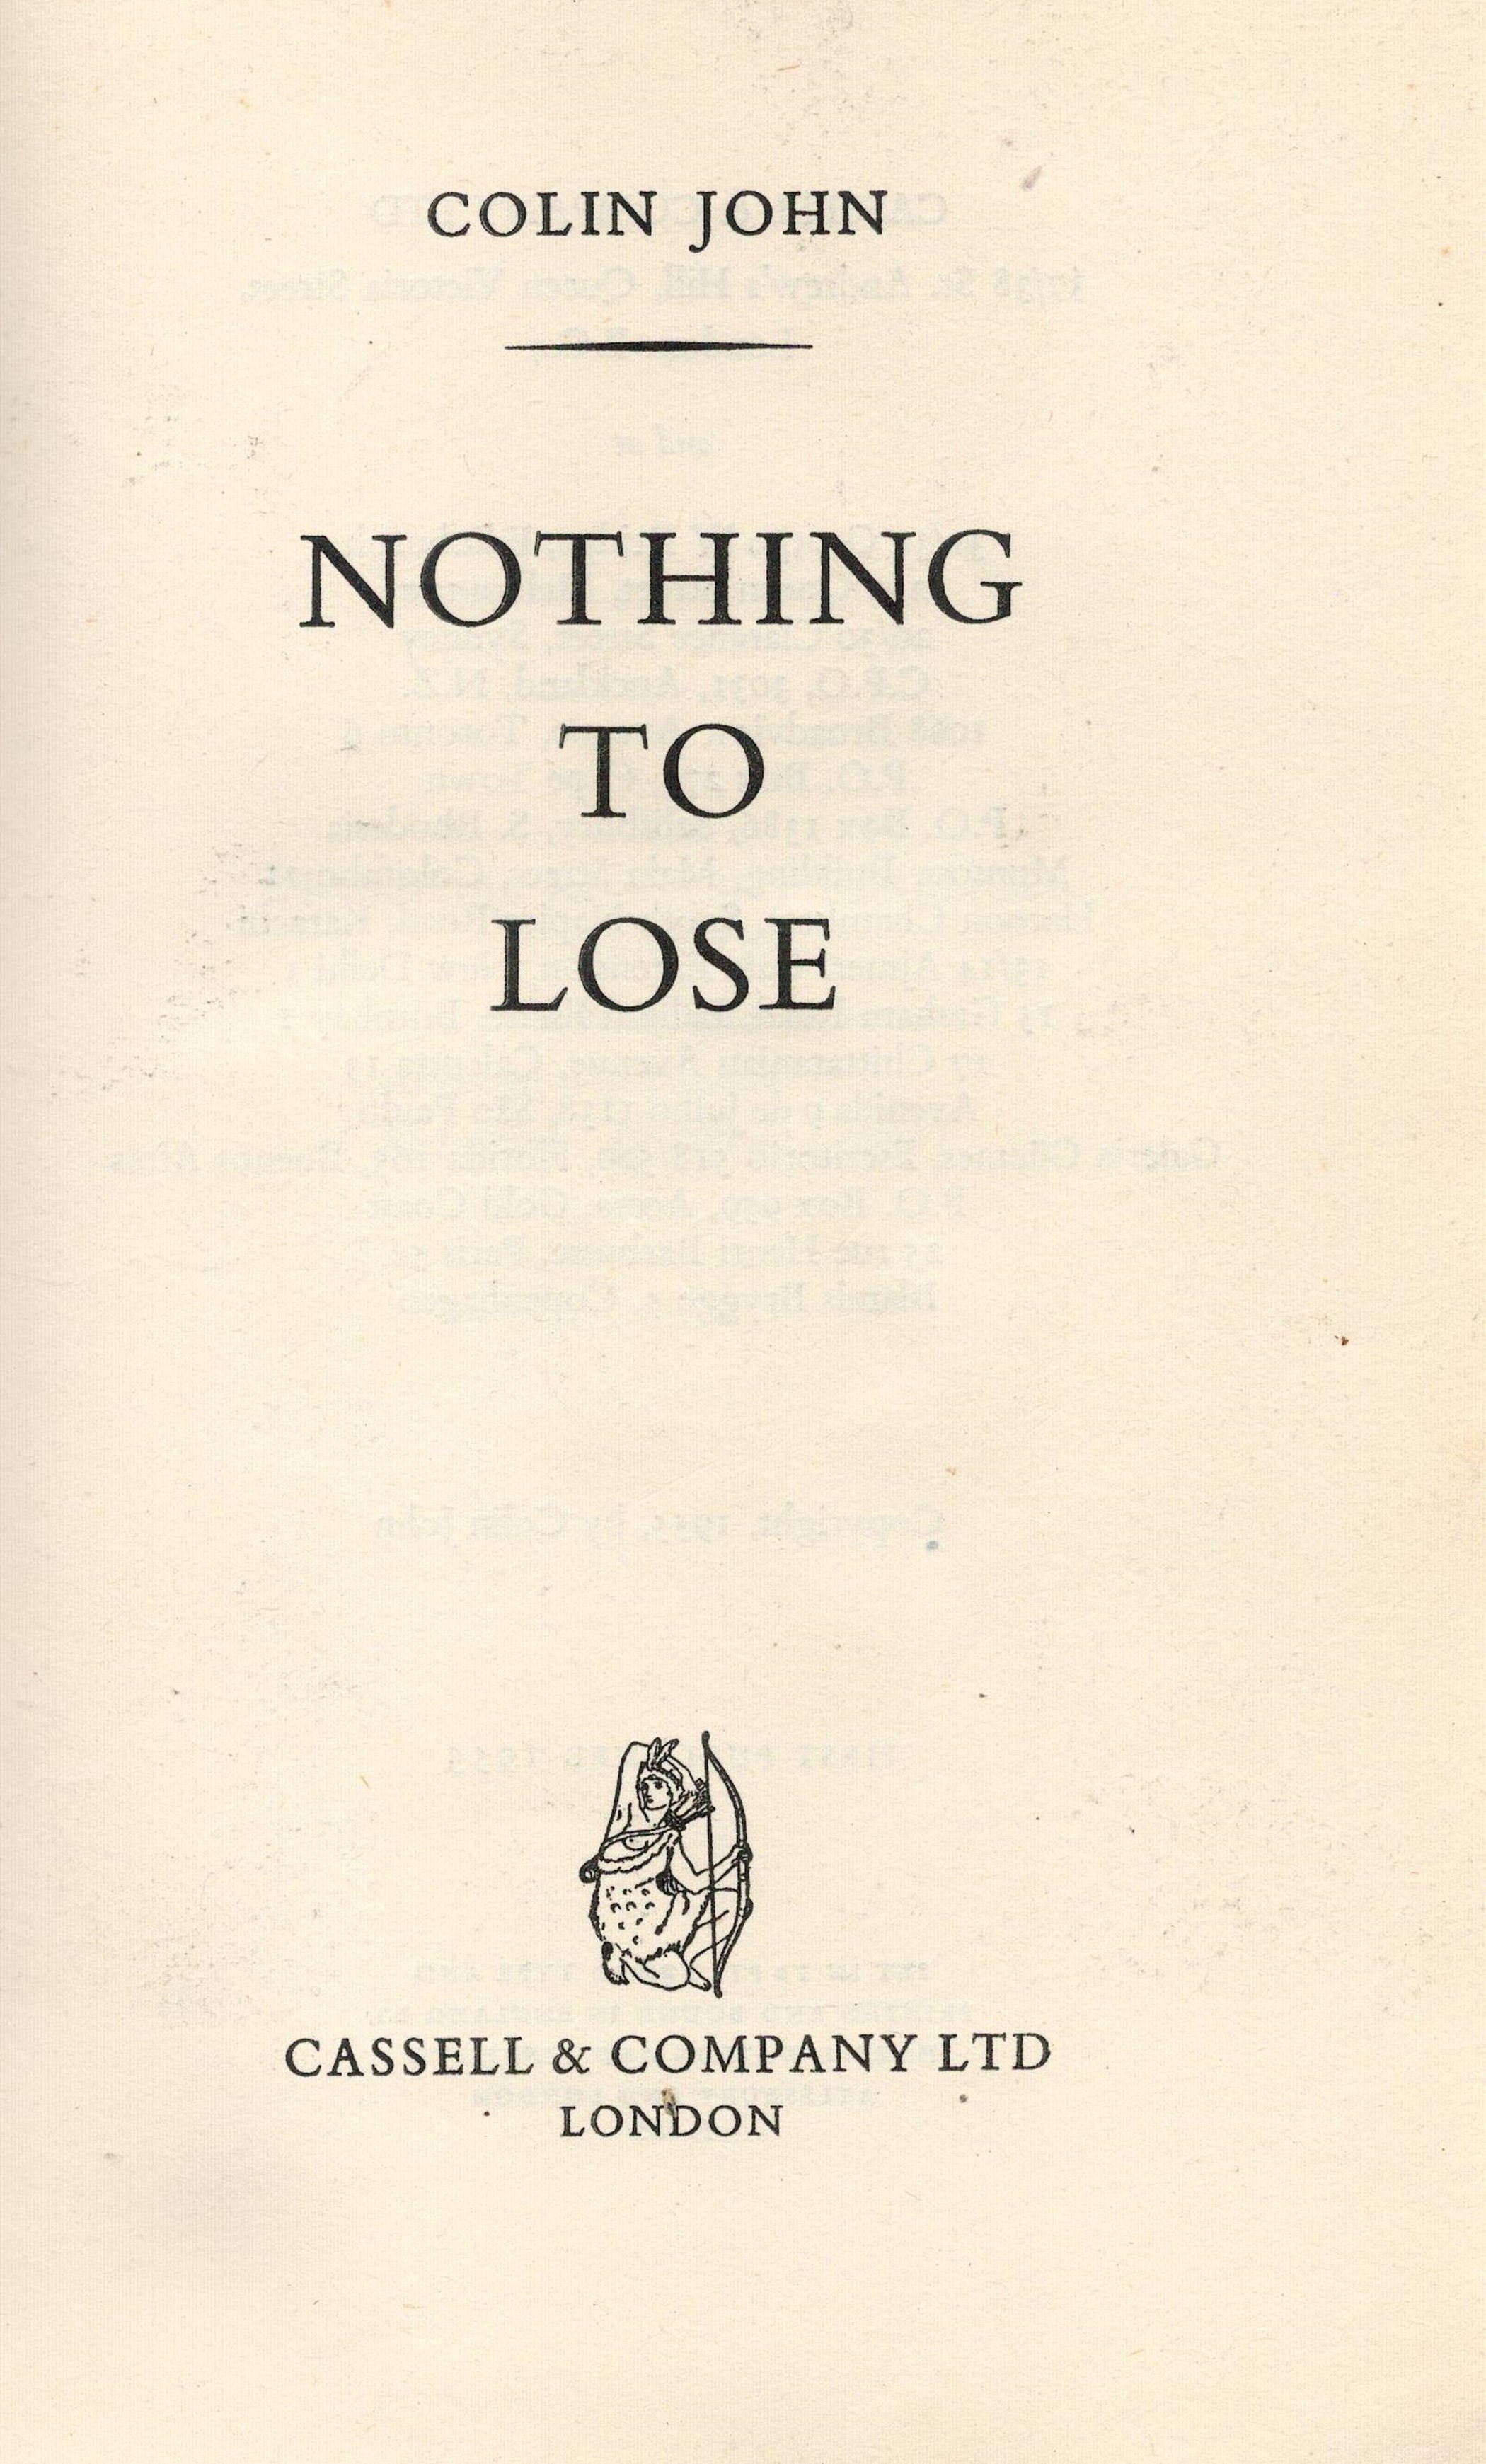 Nothing to Lose by Colin John First Edition 1955 Hardback Book published by Cassell and Co Ltd - Image 2 of 4